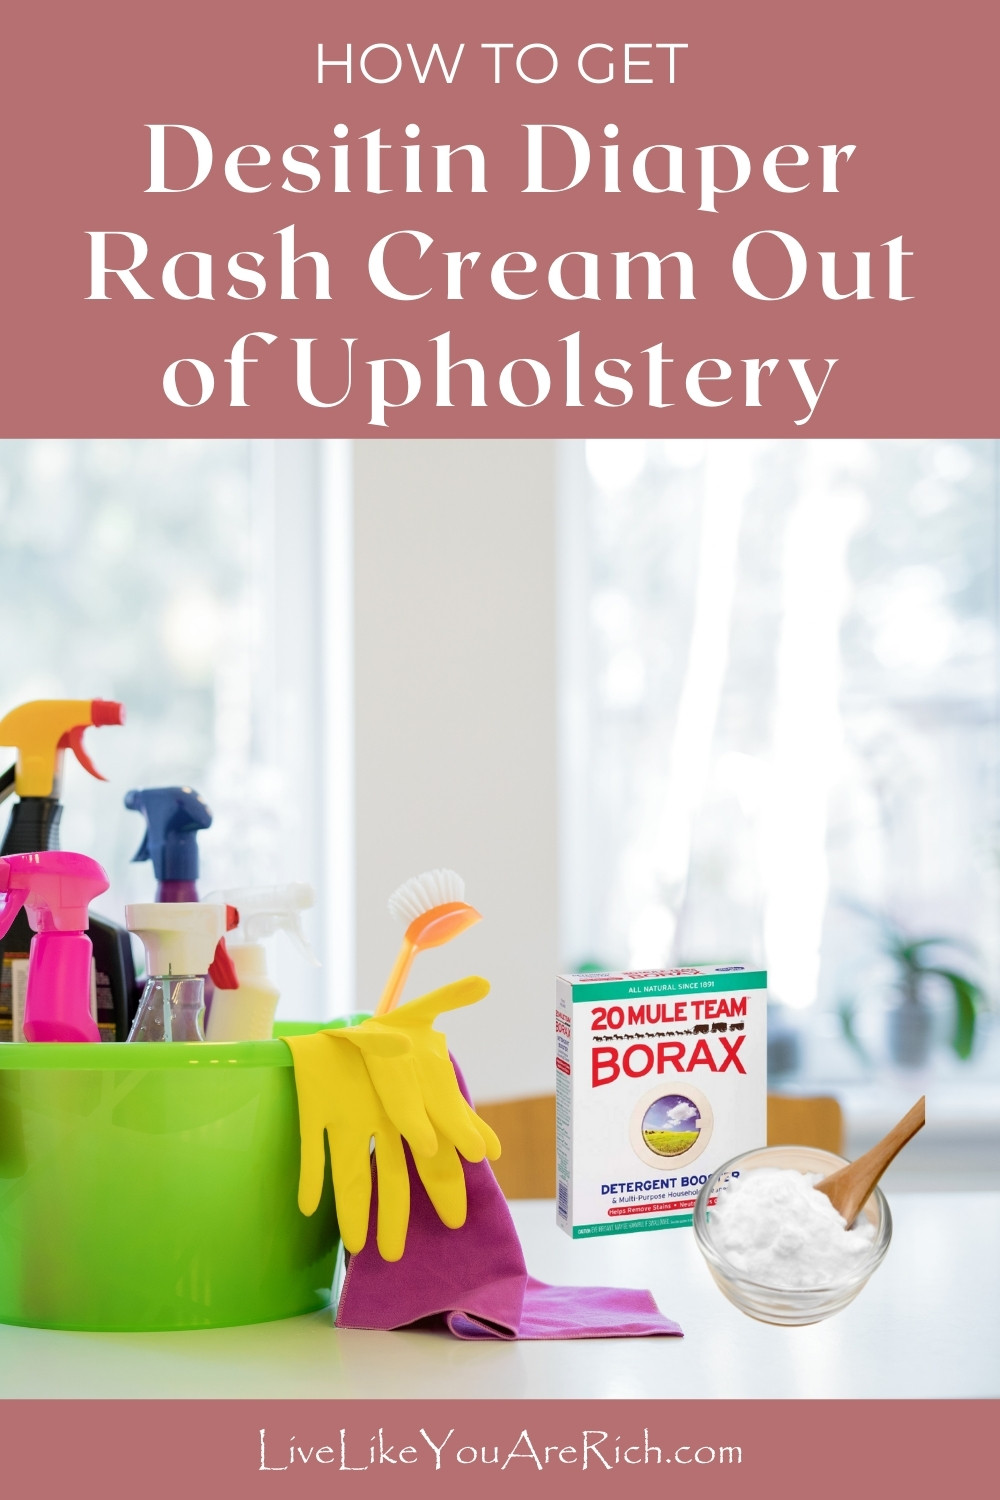 How to Get Desitin Diaper Rash Cream Out of Upholstery